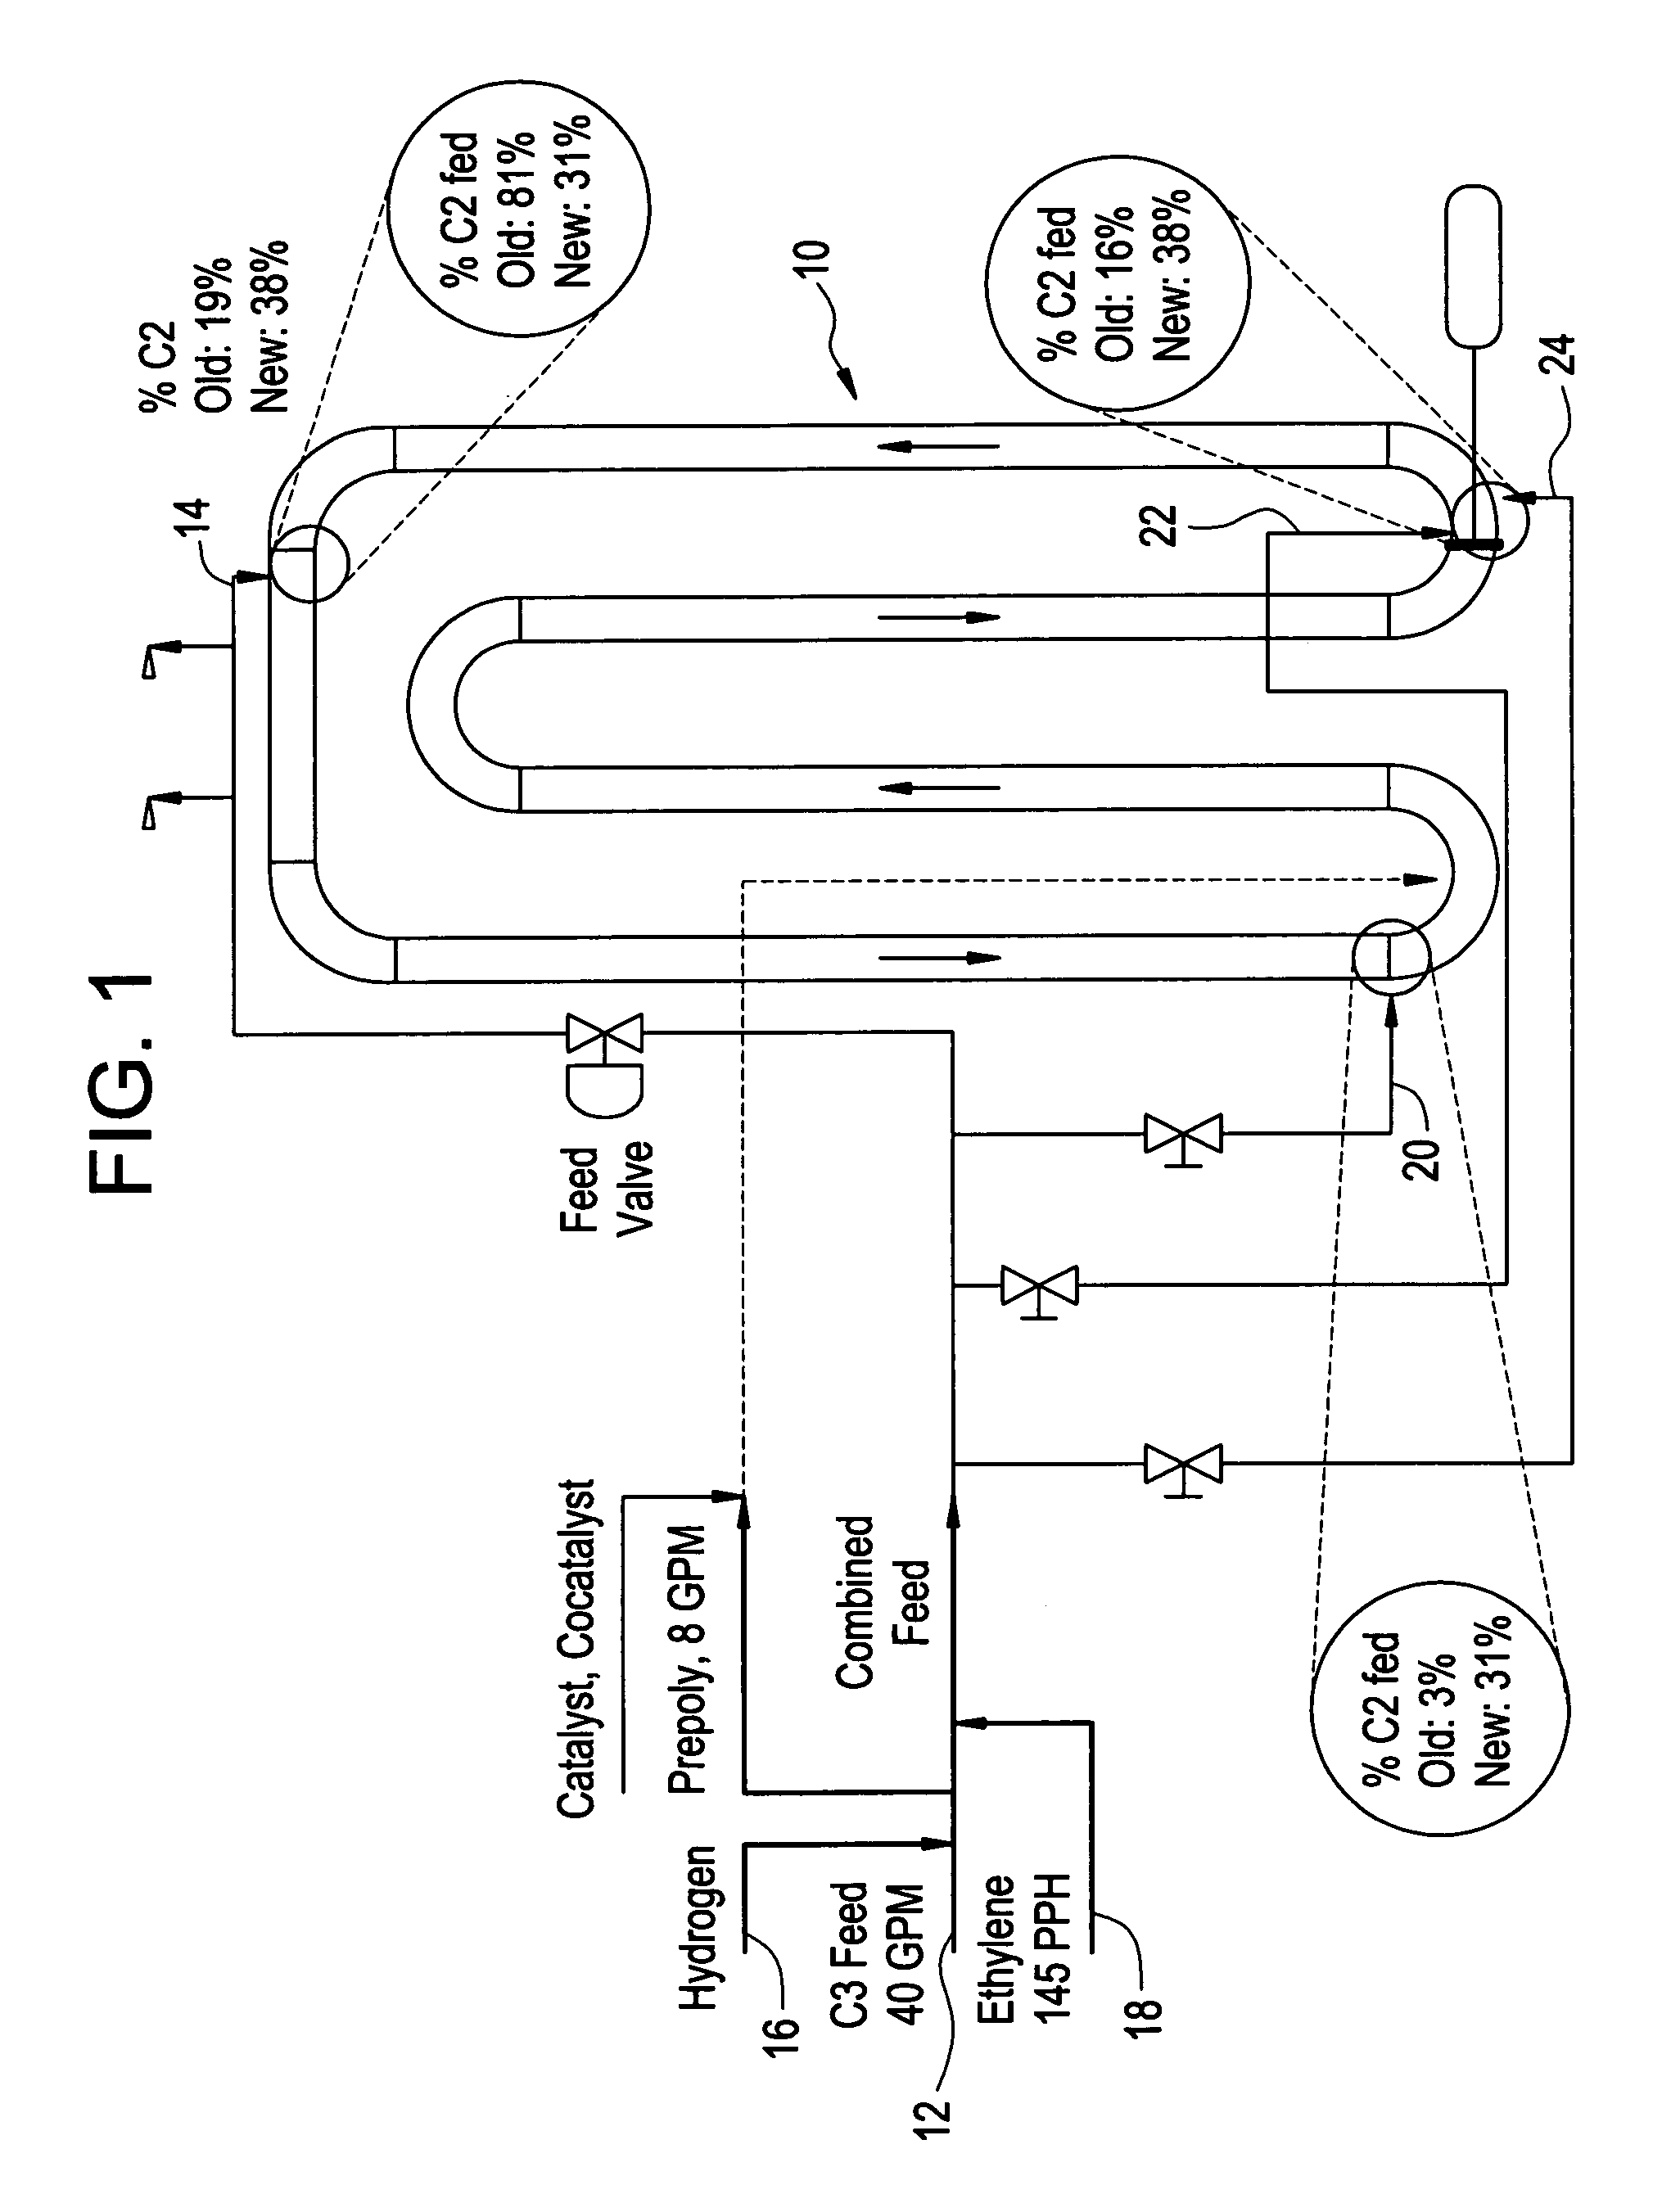 Controlled comonomer distribution along a reactor for copolymer production